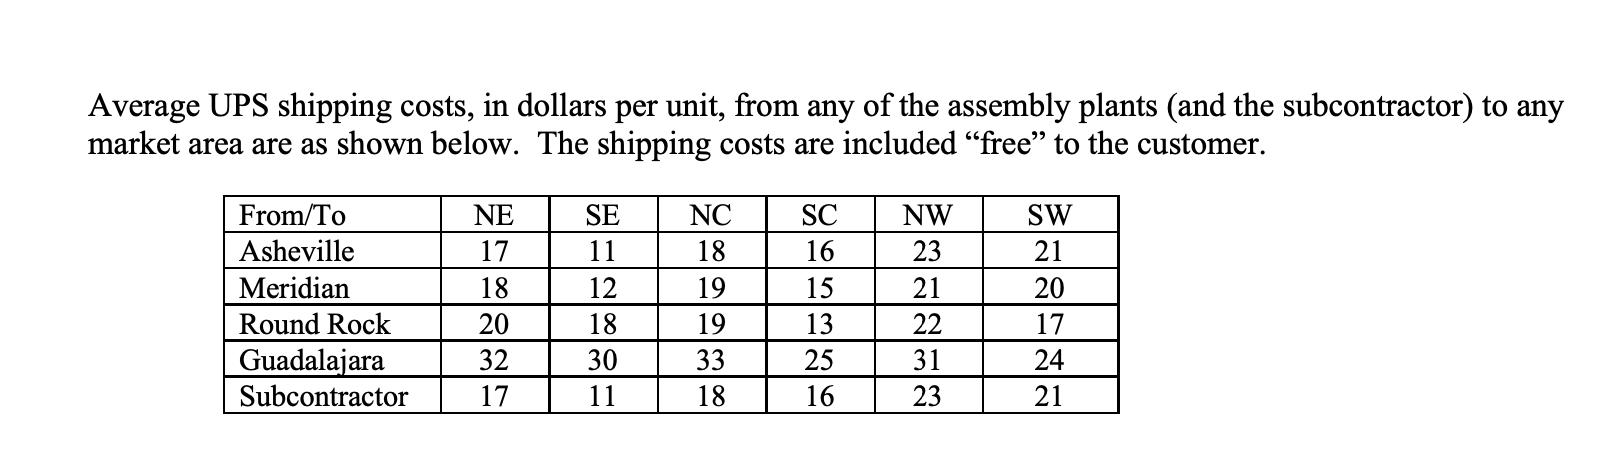 Average UPS shipping costs, in dollars per unit, from any of the assembly plants (and the subcontractor) to any market area a